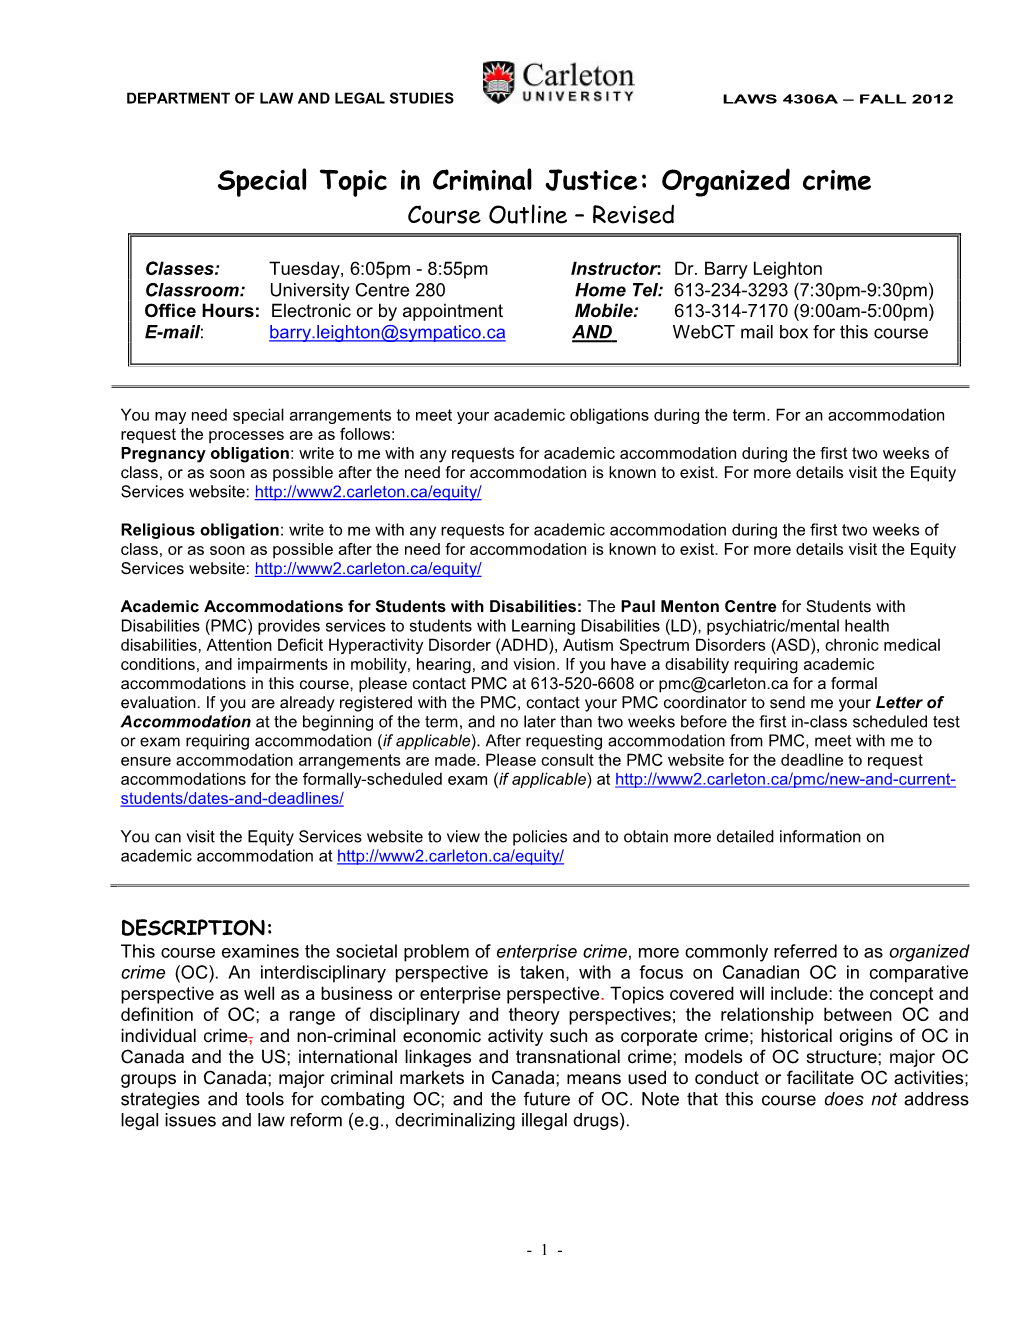 Organized Crime Course Outline – Revised